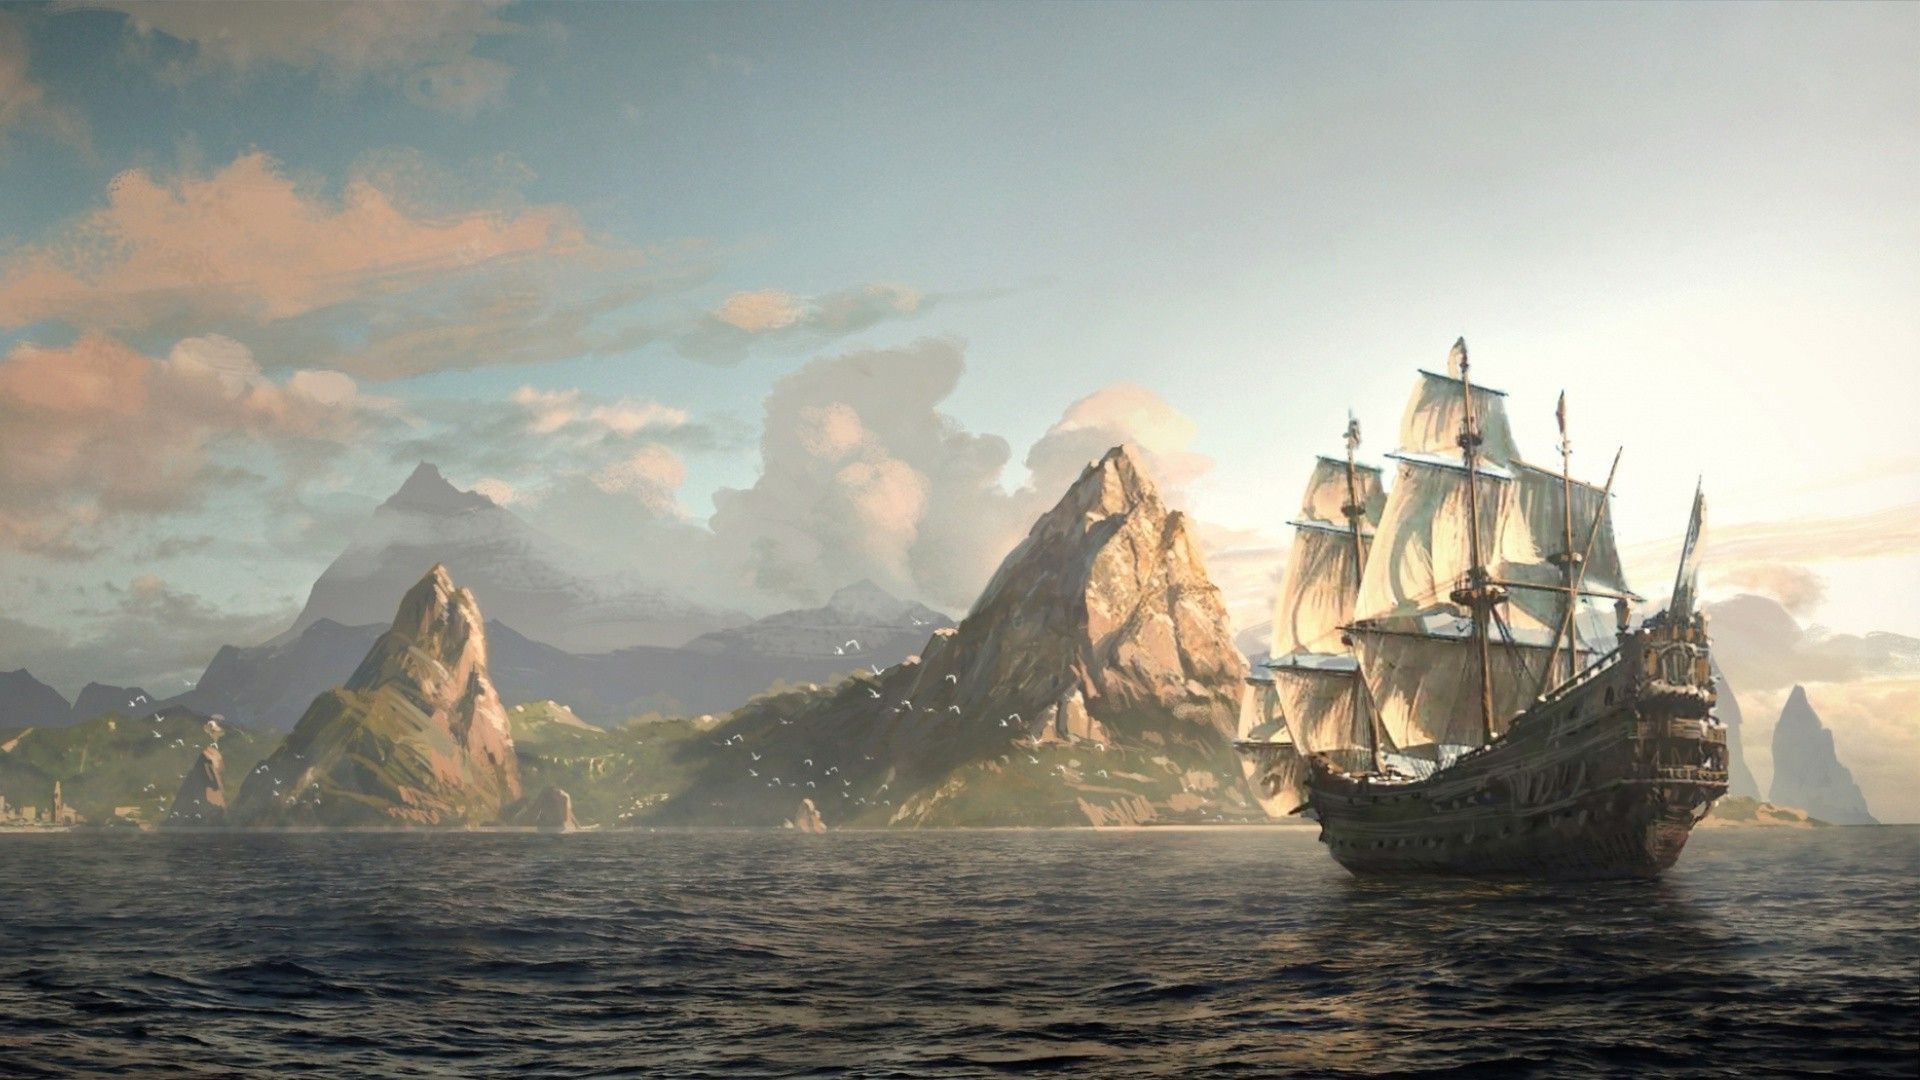 Ac4 Wallpaper Top Background